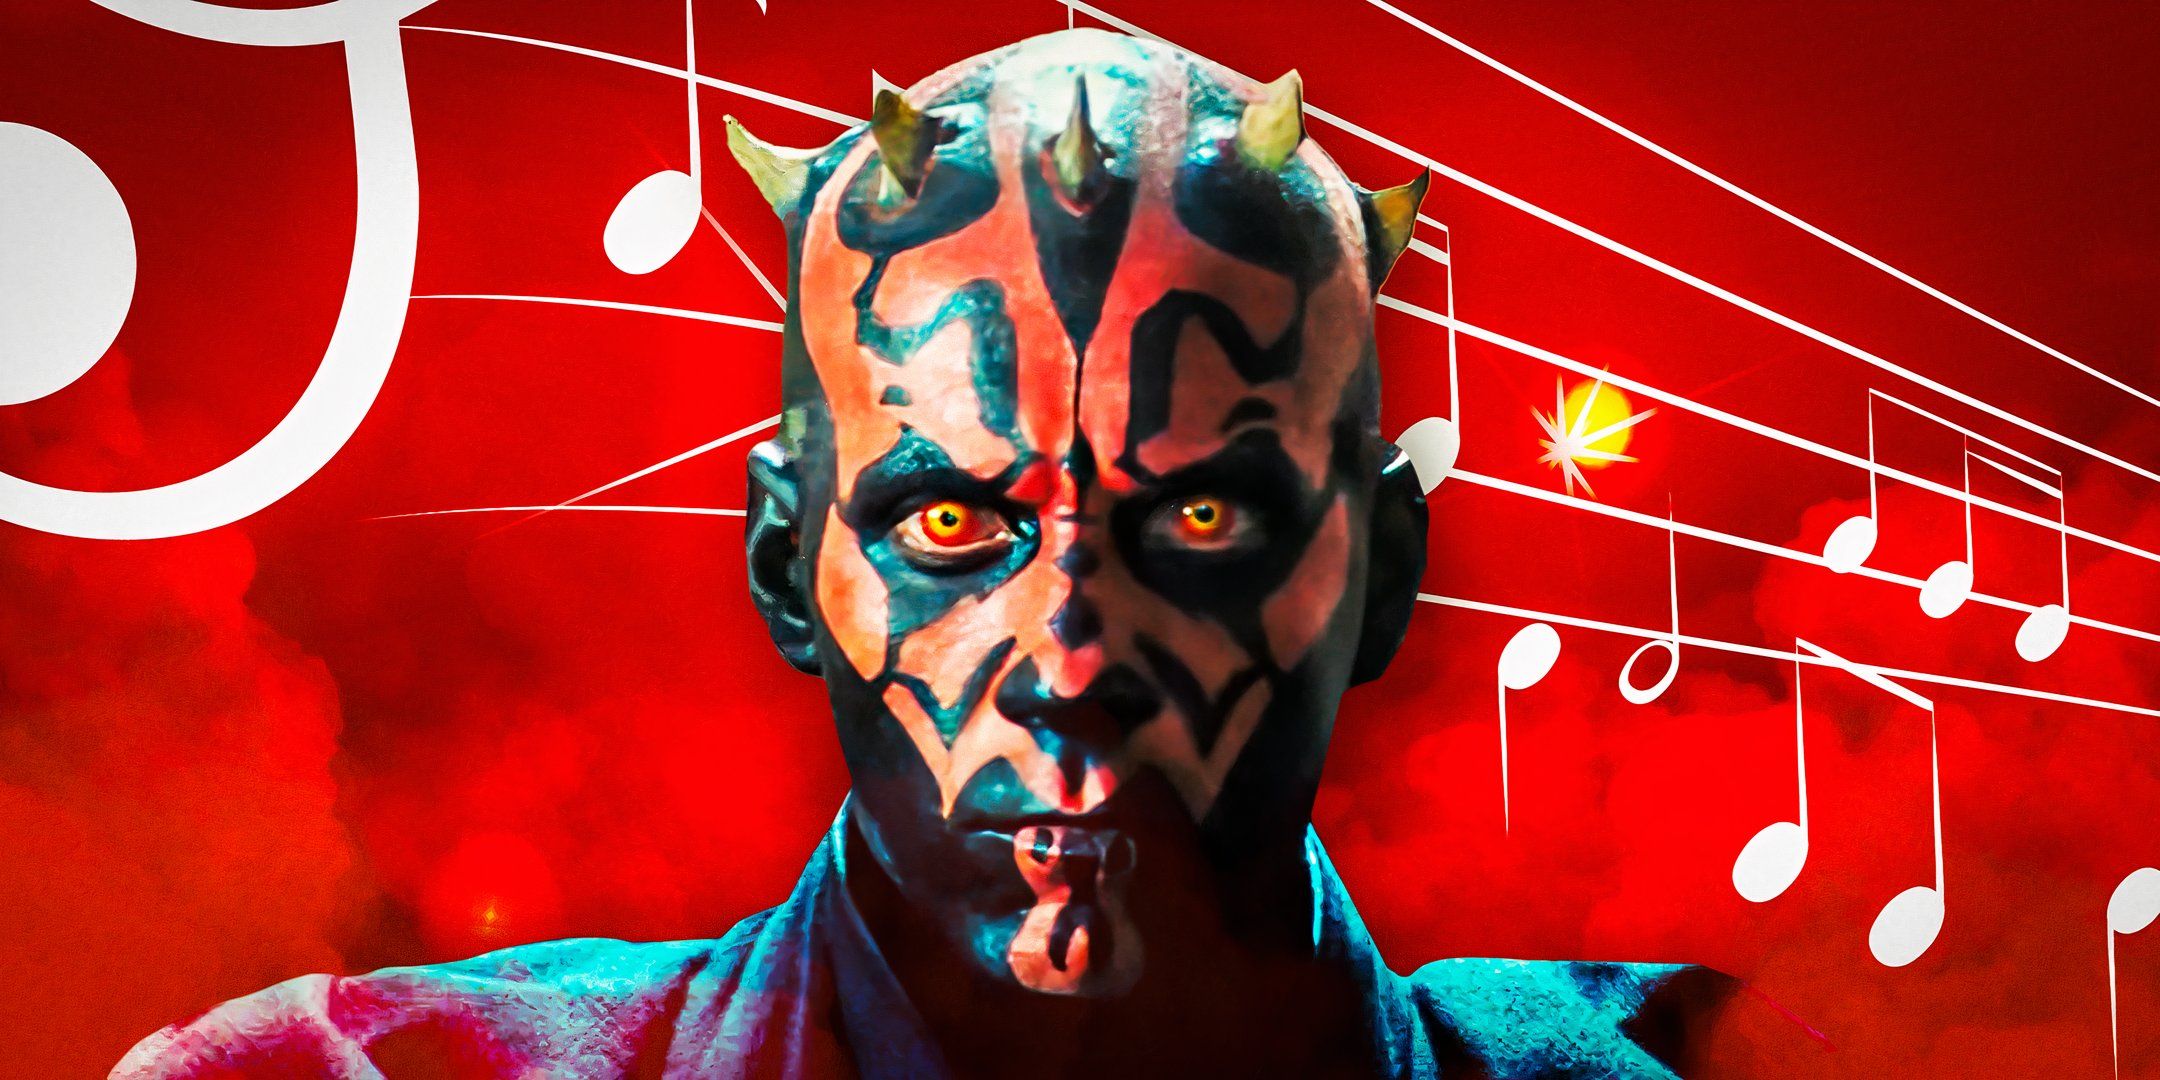 Star Wars Releasing Official Pop Song About The Sith